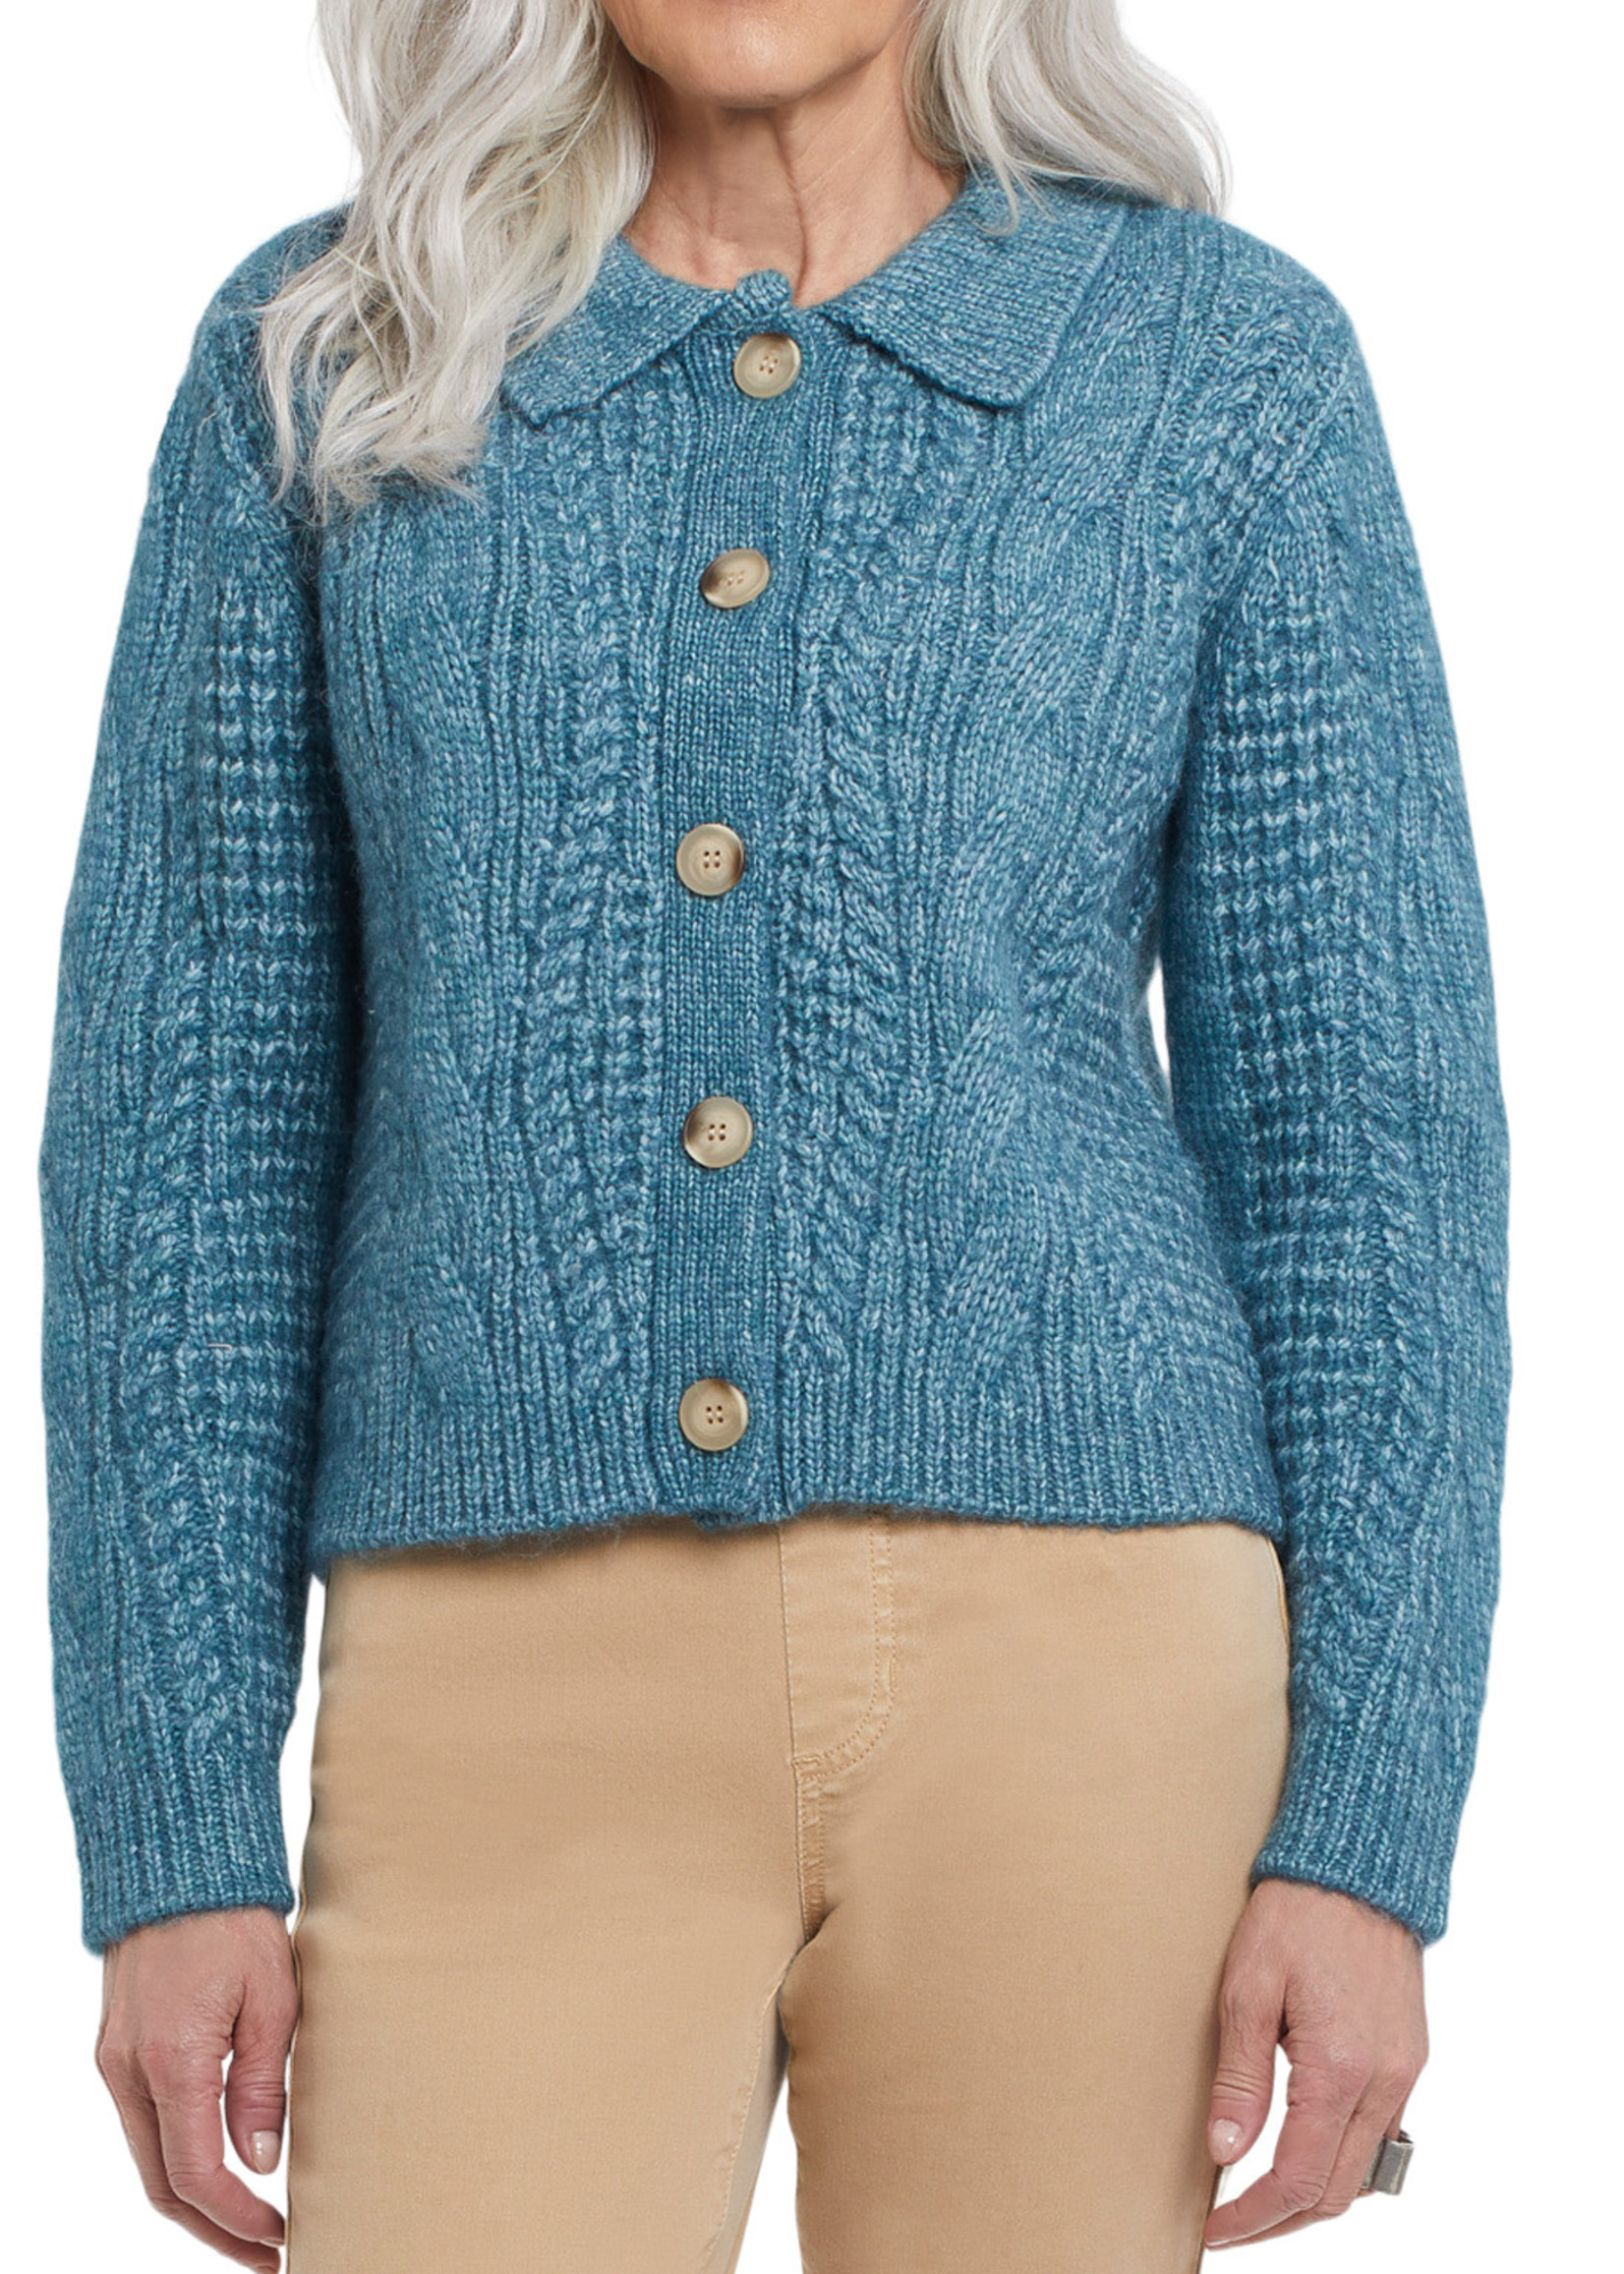 Tribal Tribal Cable Knit Sweater Cardigan Tapestry